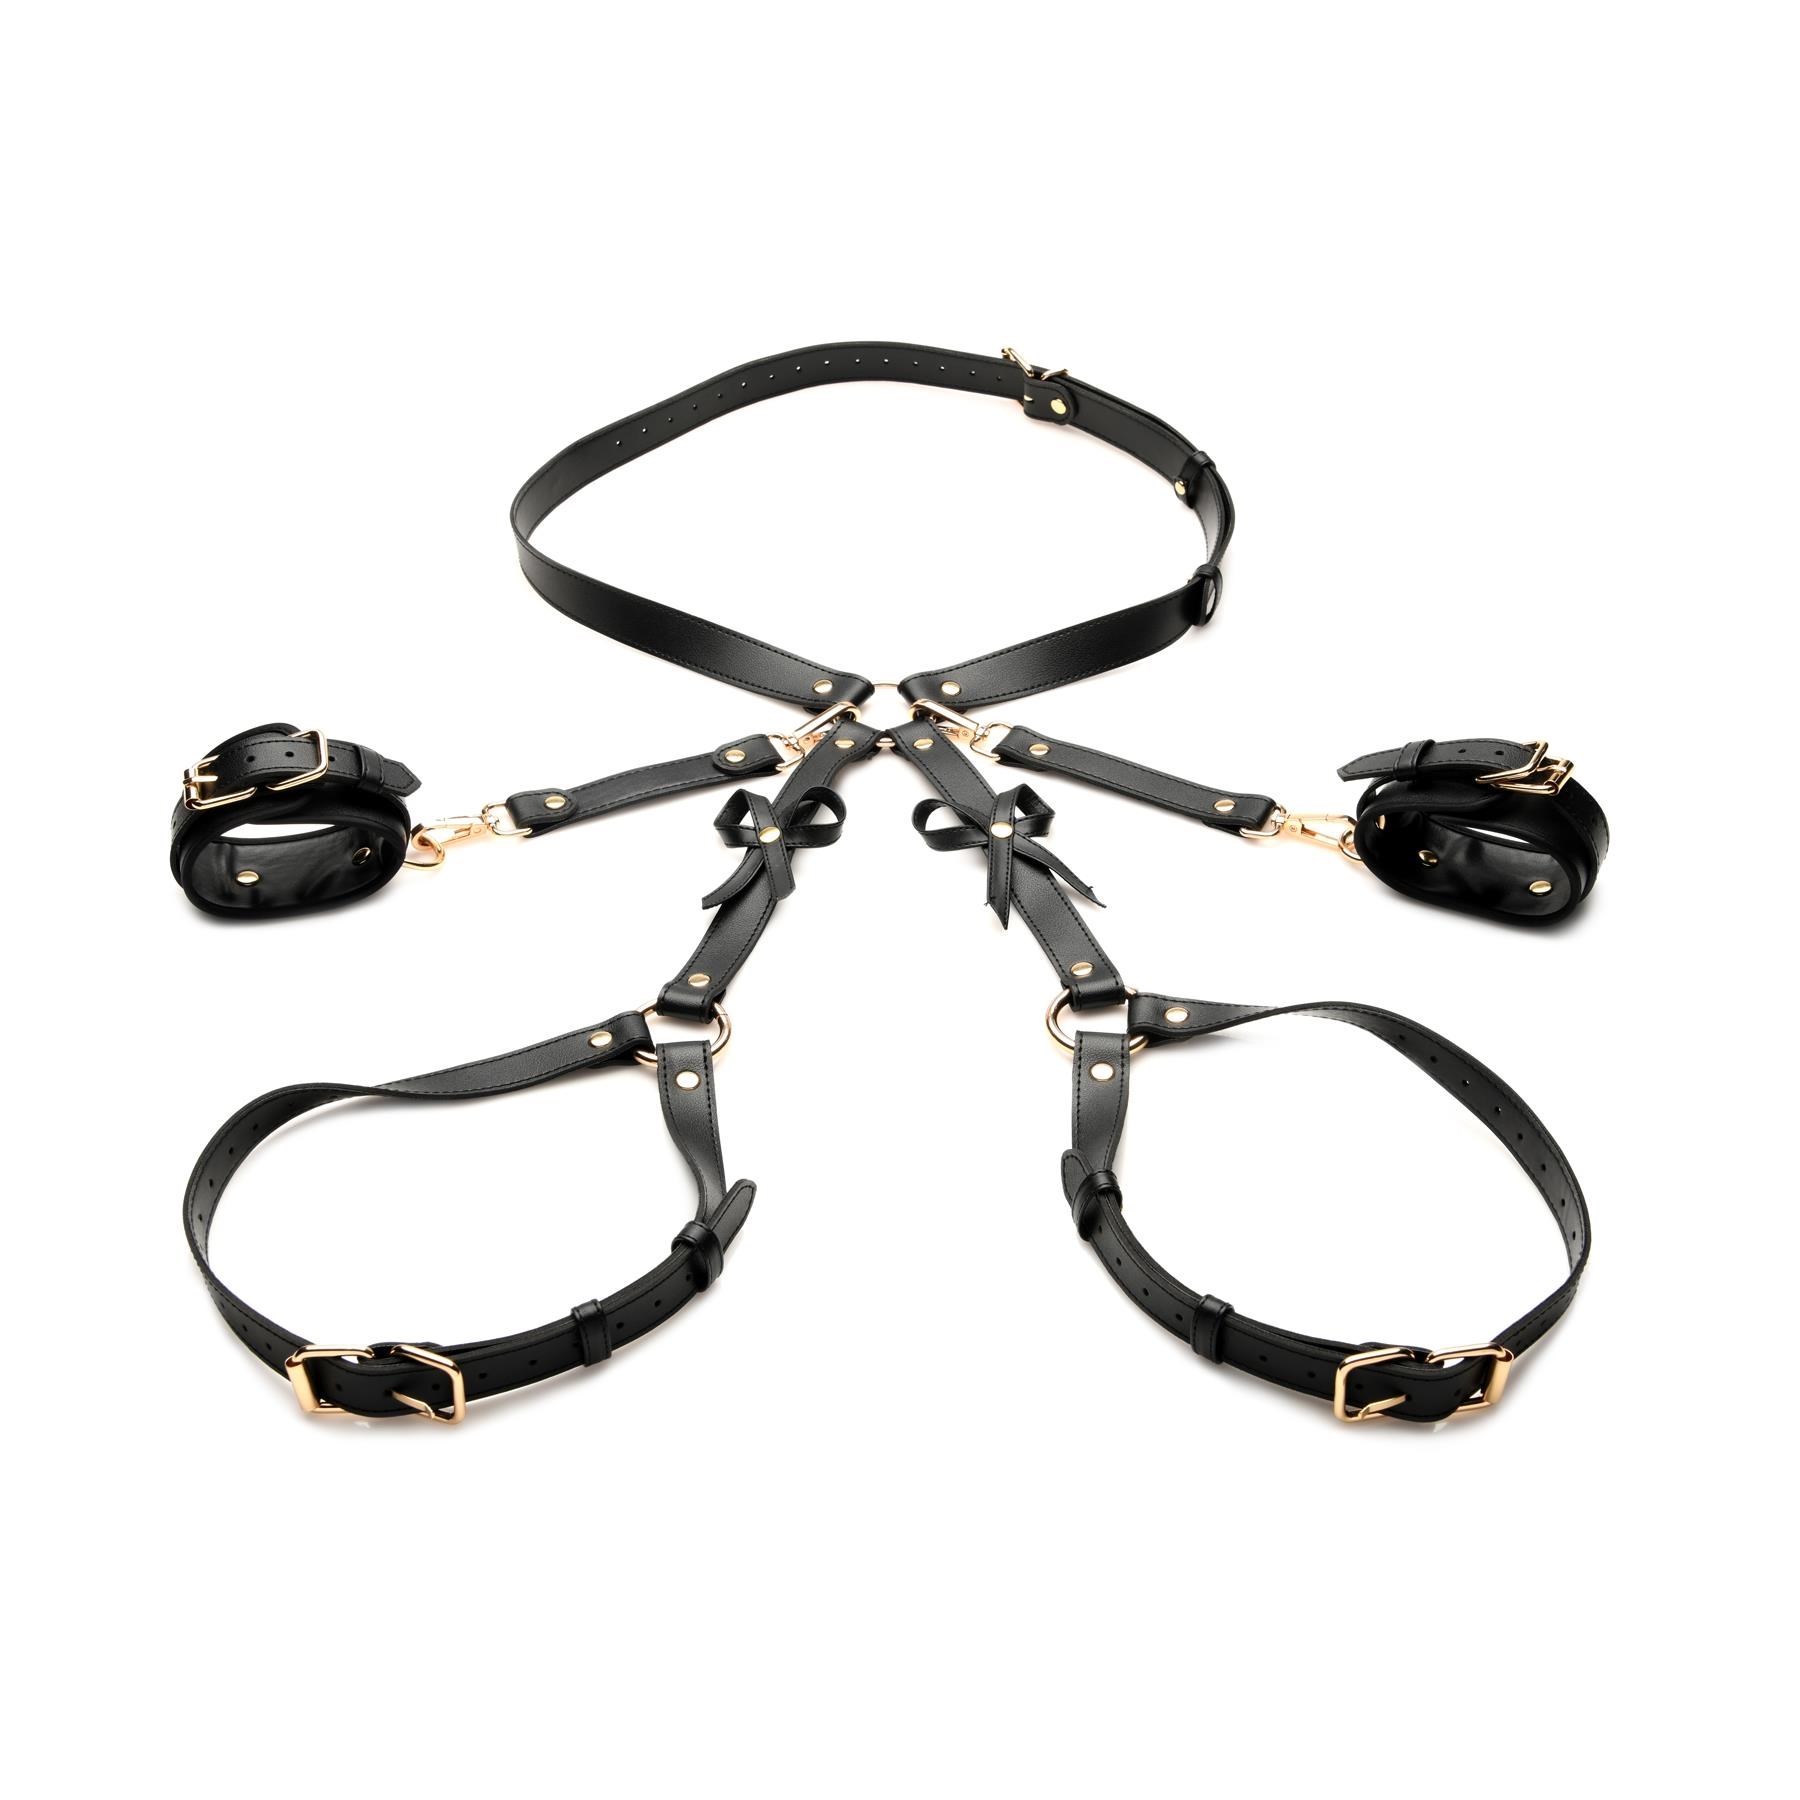 Strict Bondage Harness With Bows - Table Top Product Shot